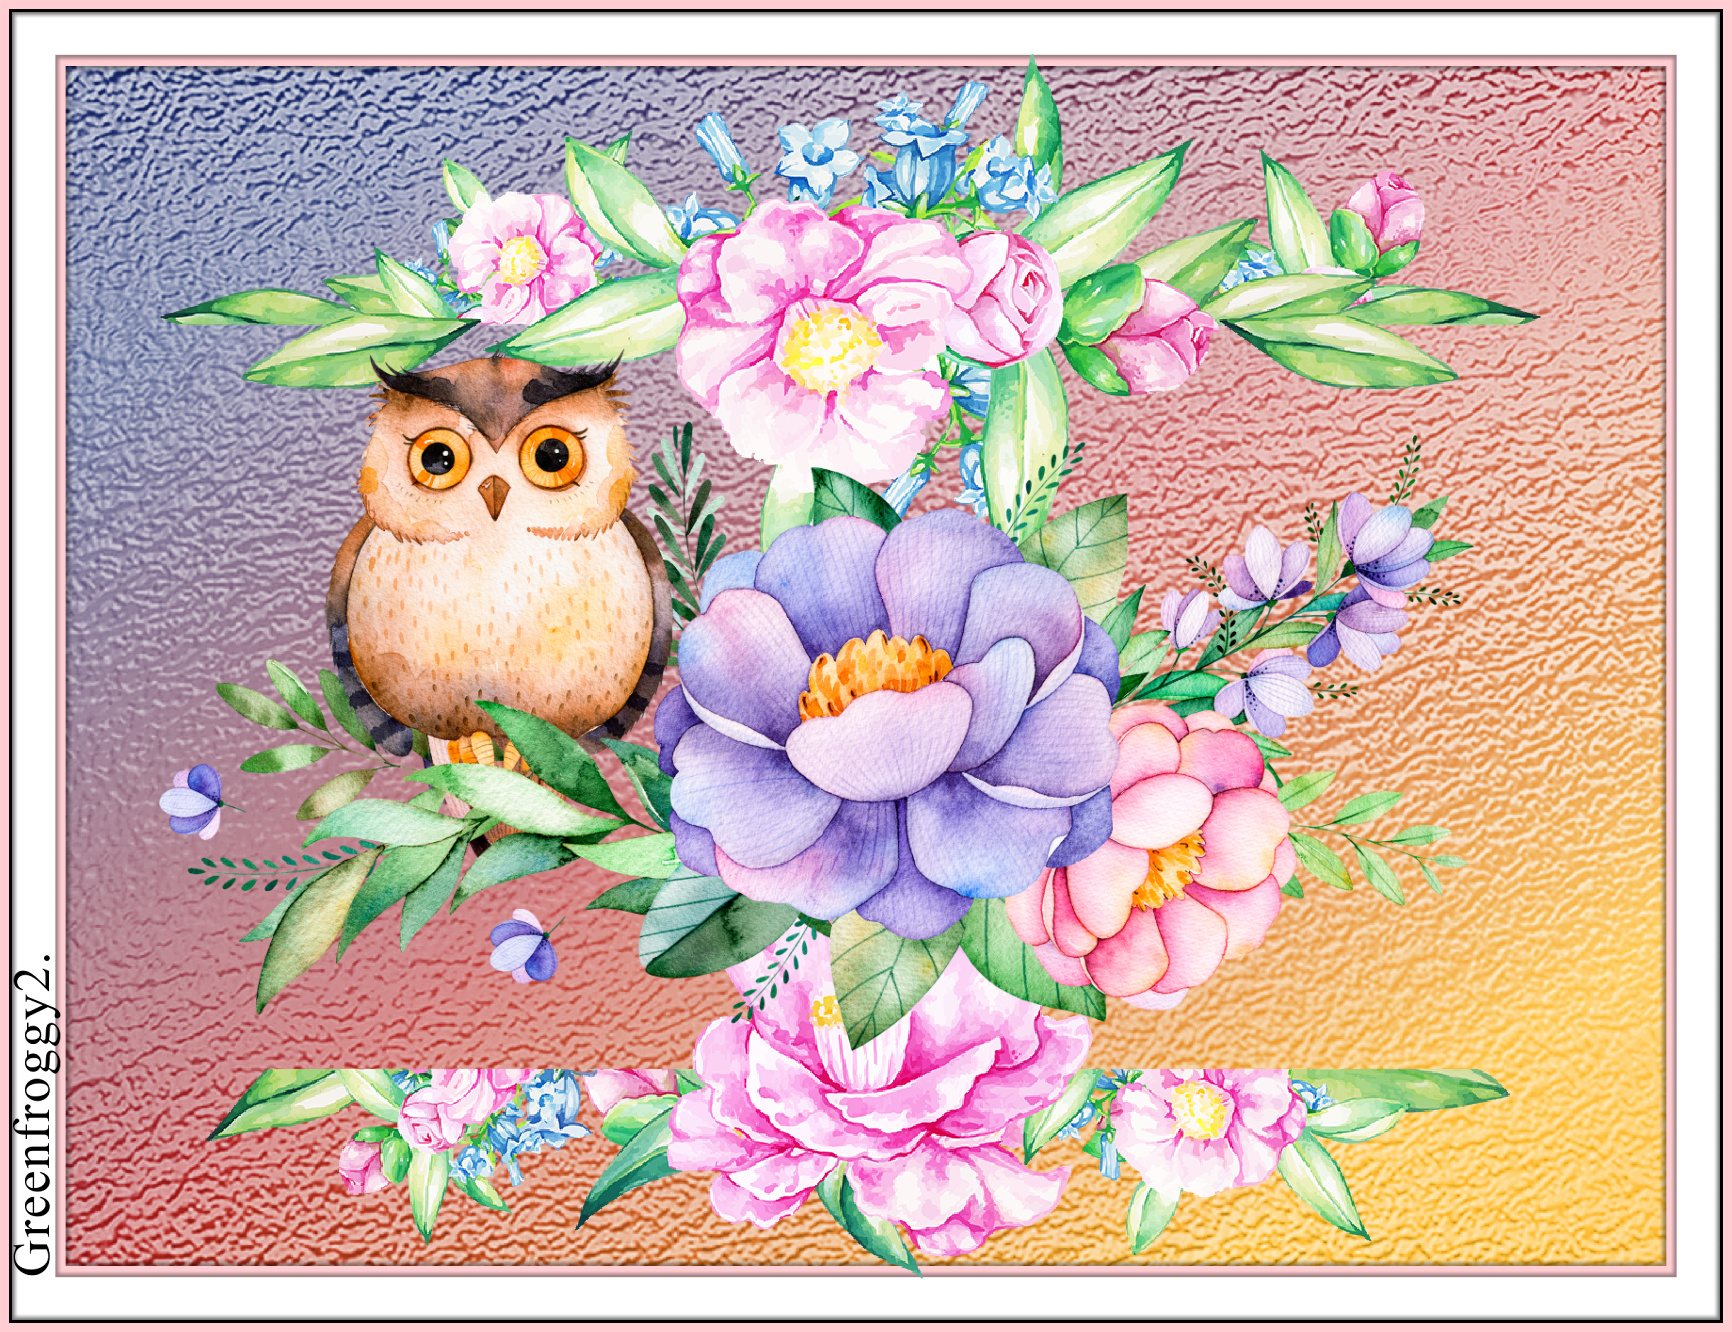 OWL AND FLOWERS by GREENFROGGY1